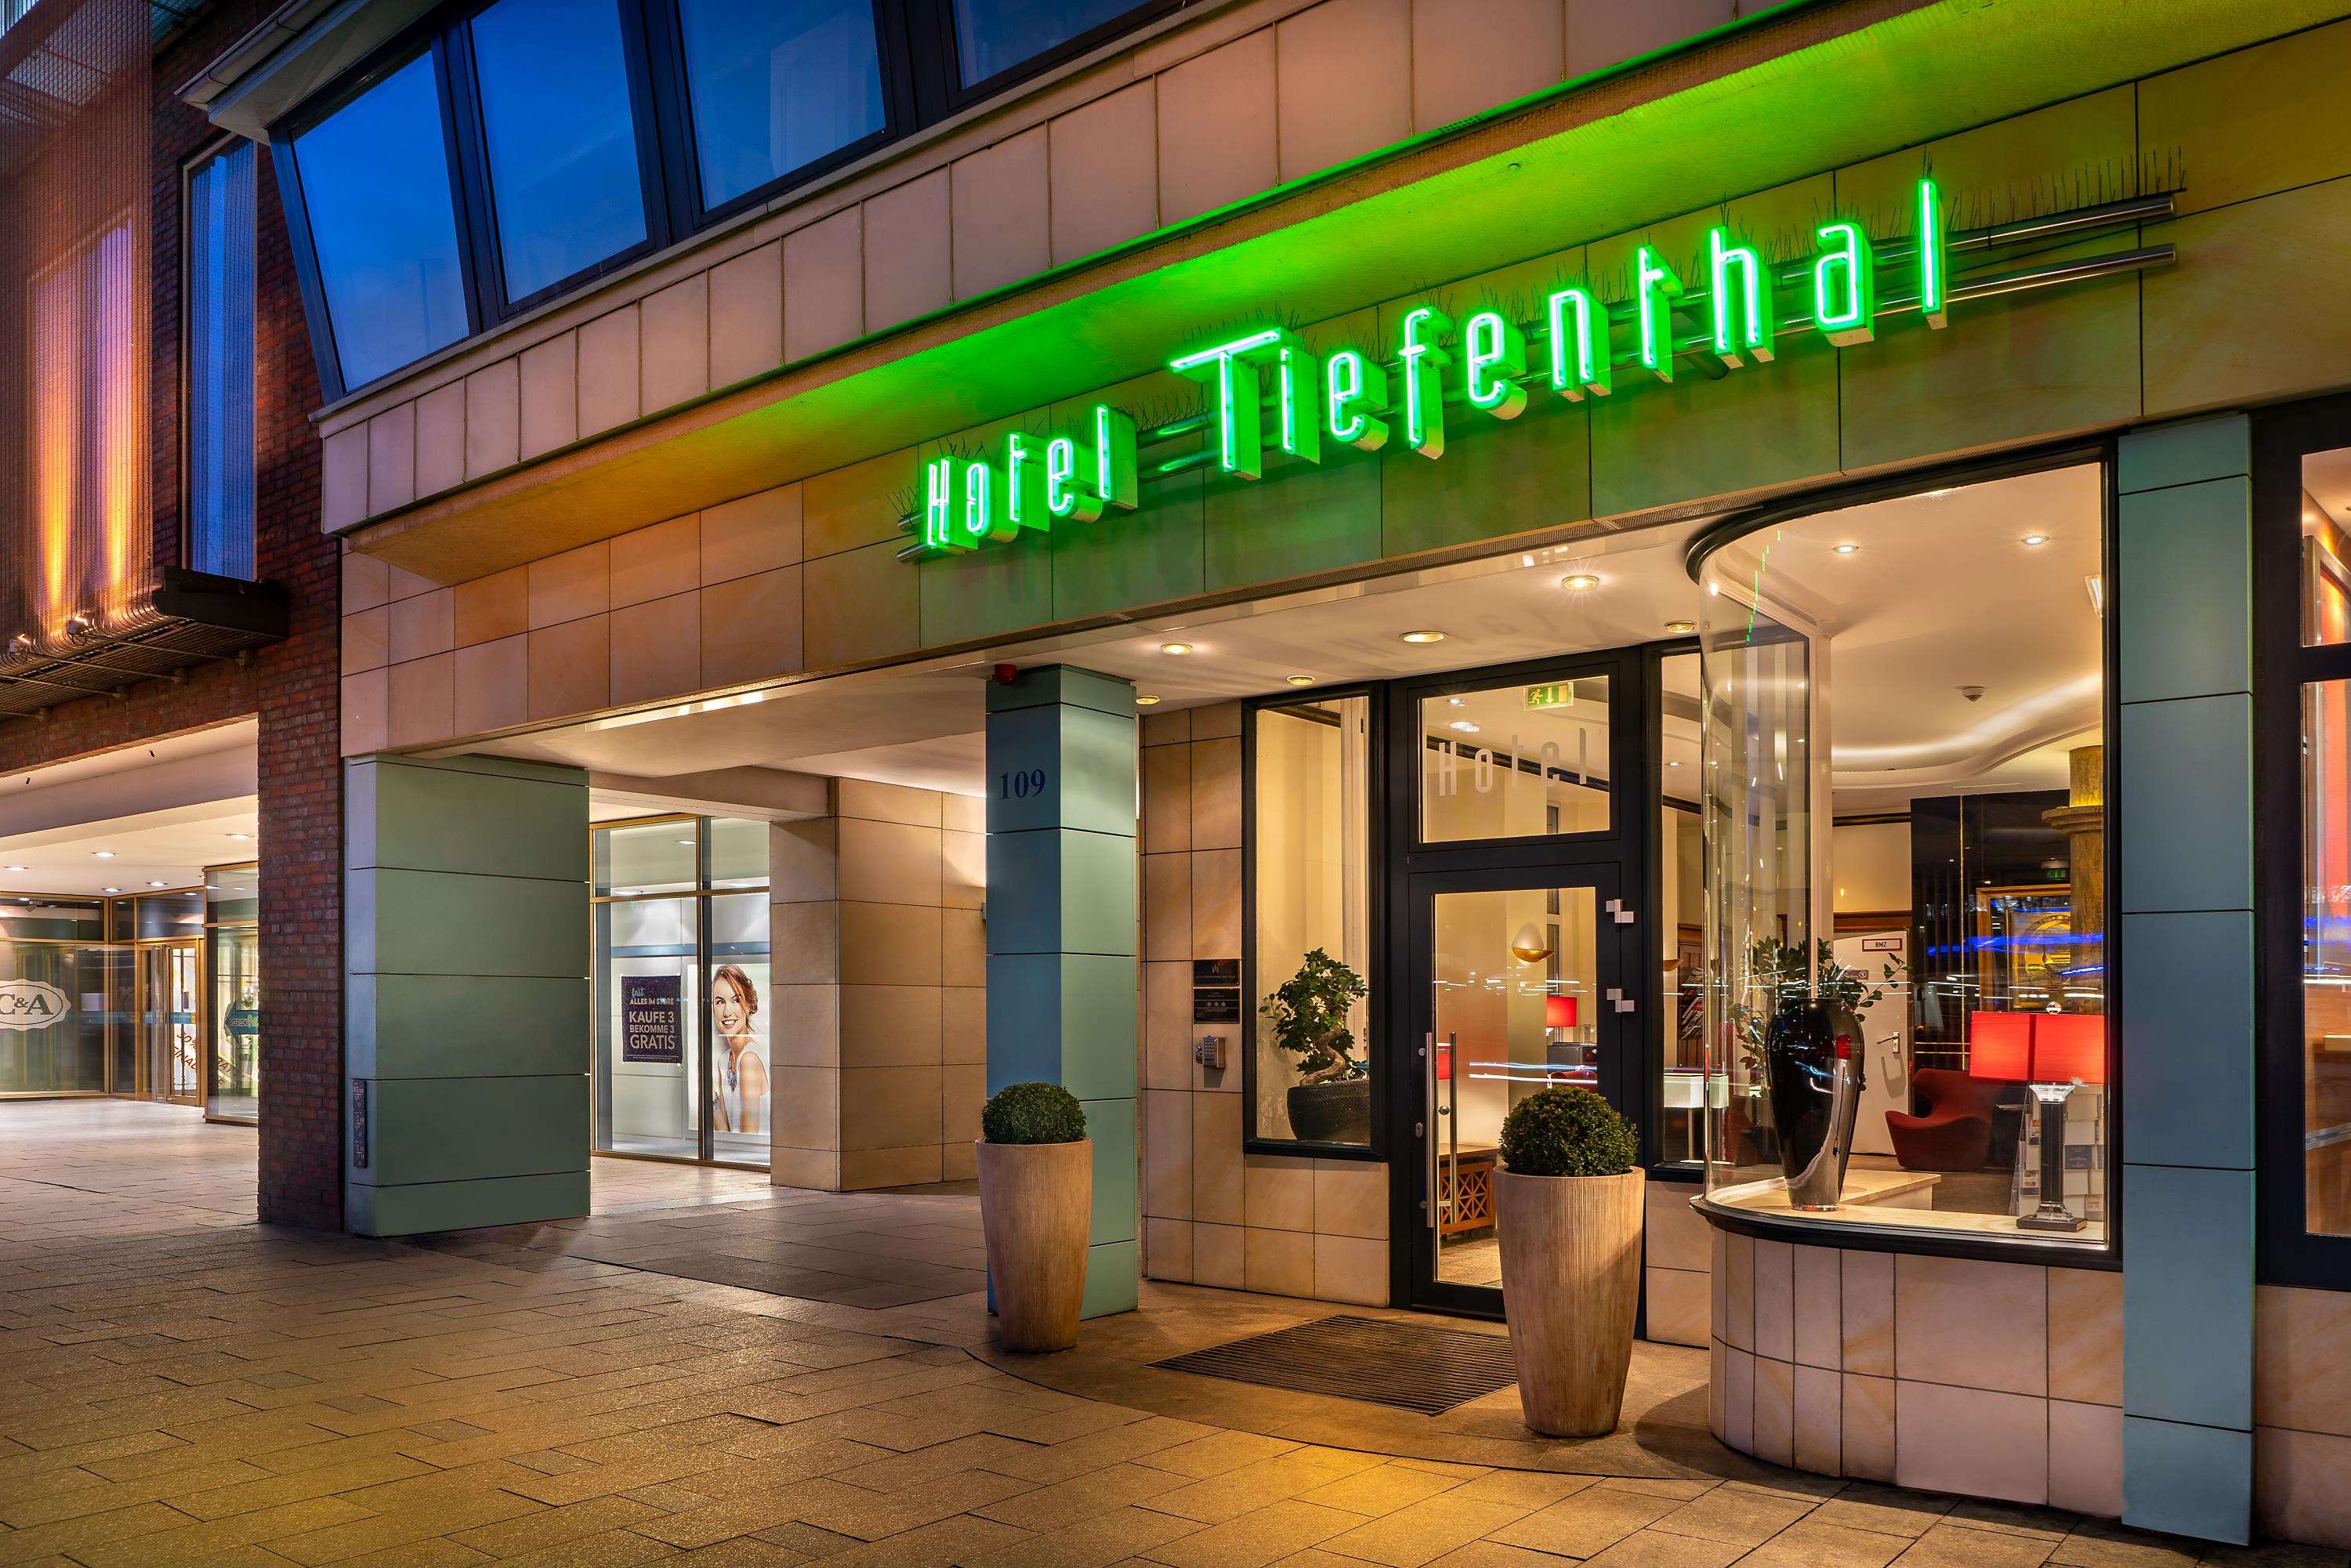 City Partner Hotel Tiefenthal